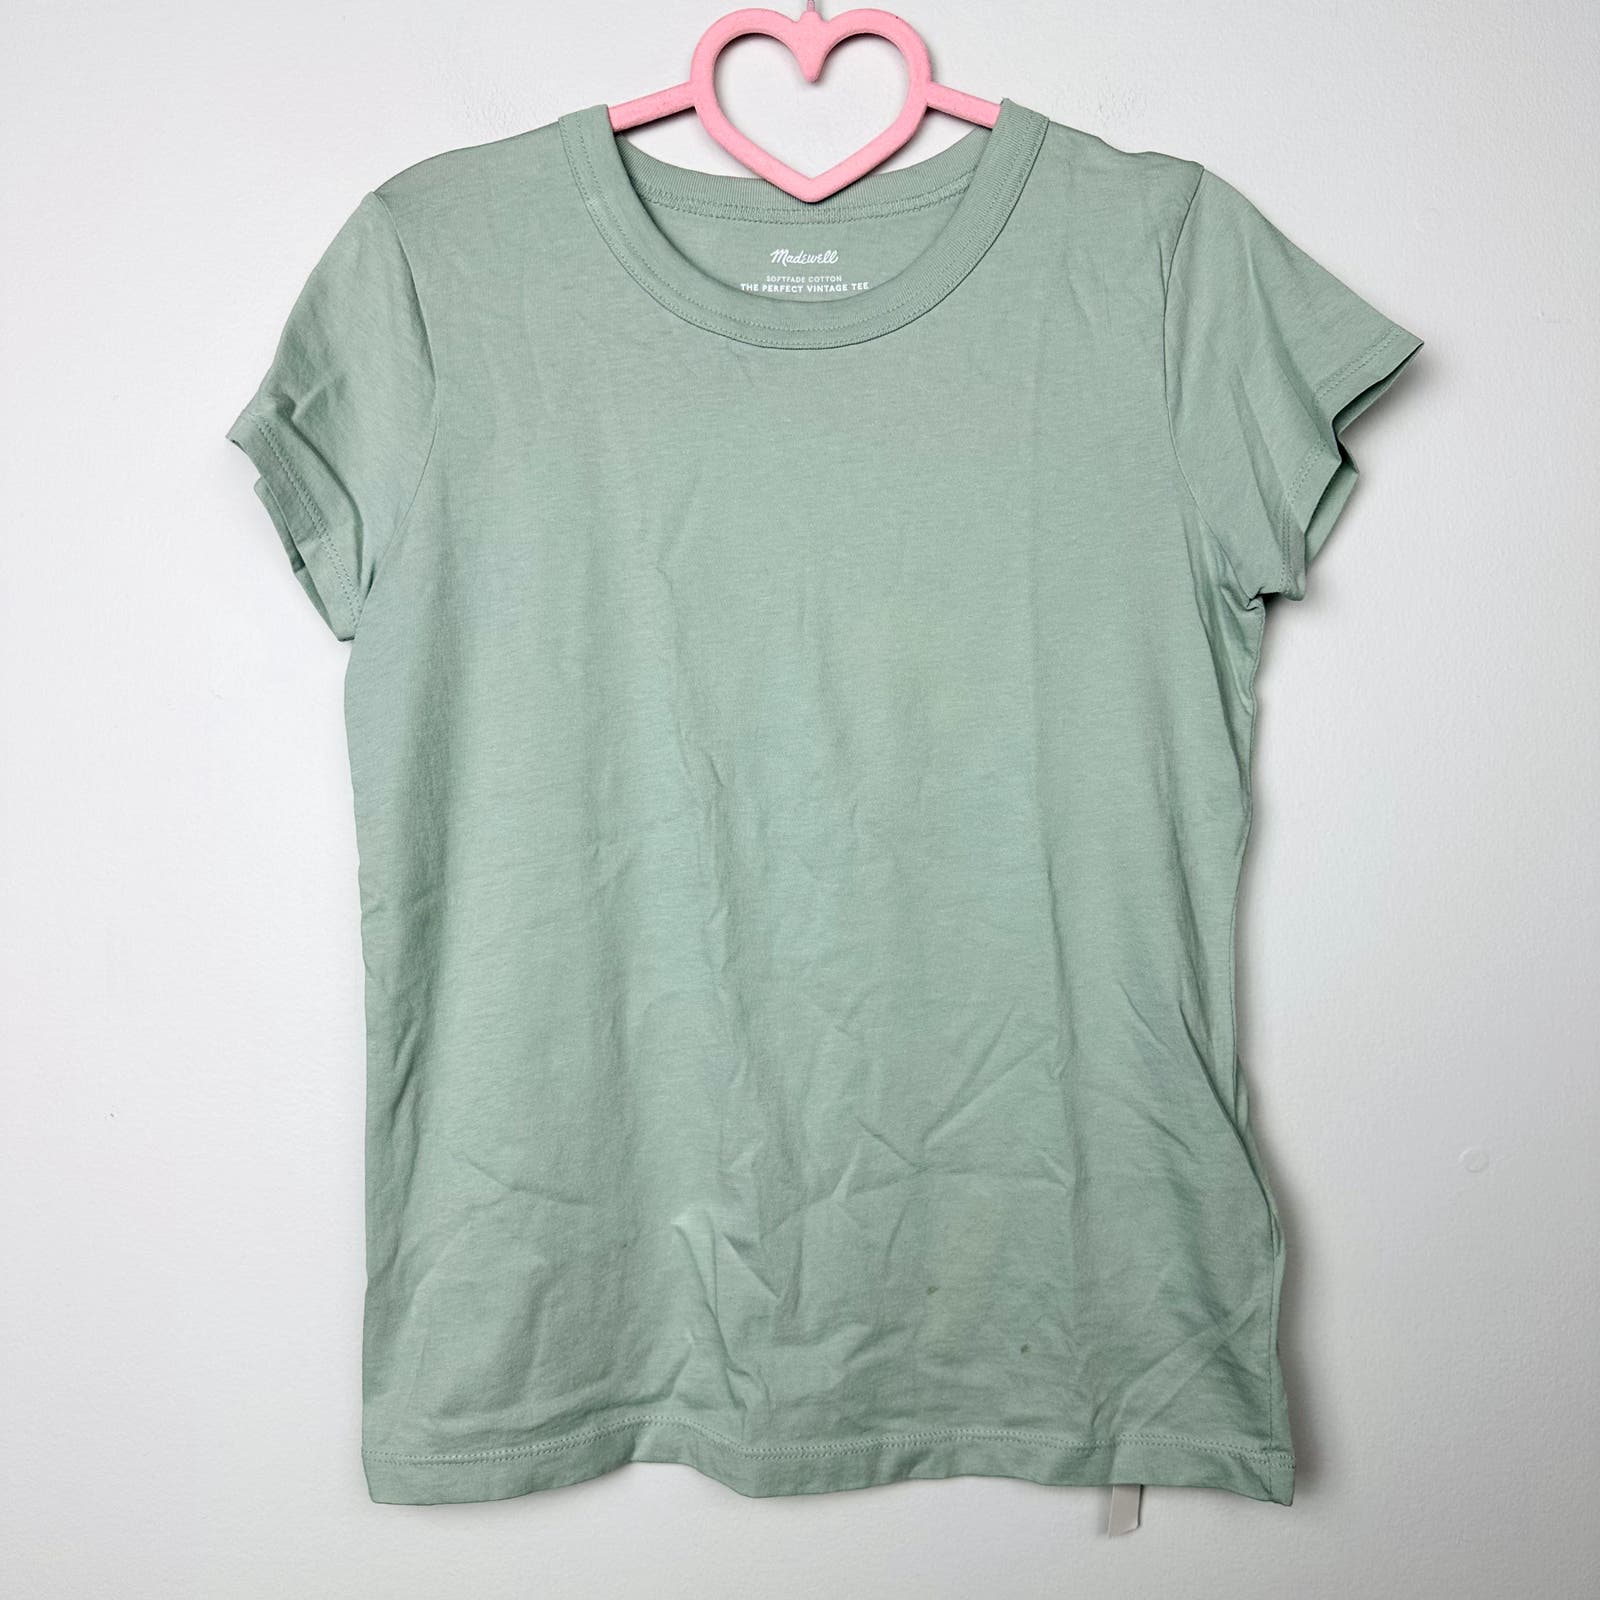 Madewell NWT Green Softfade Cotton Perfect Vintage Tee Size 2X